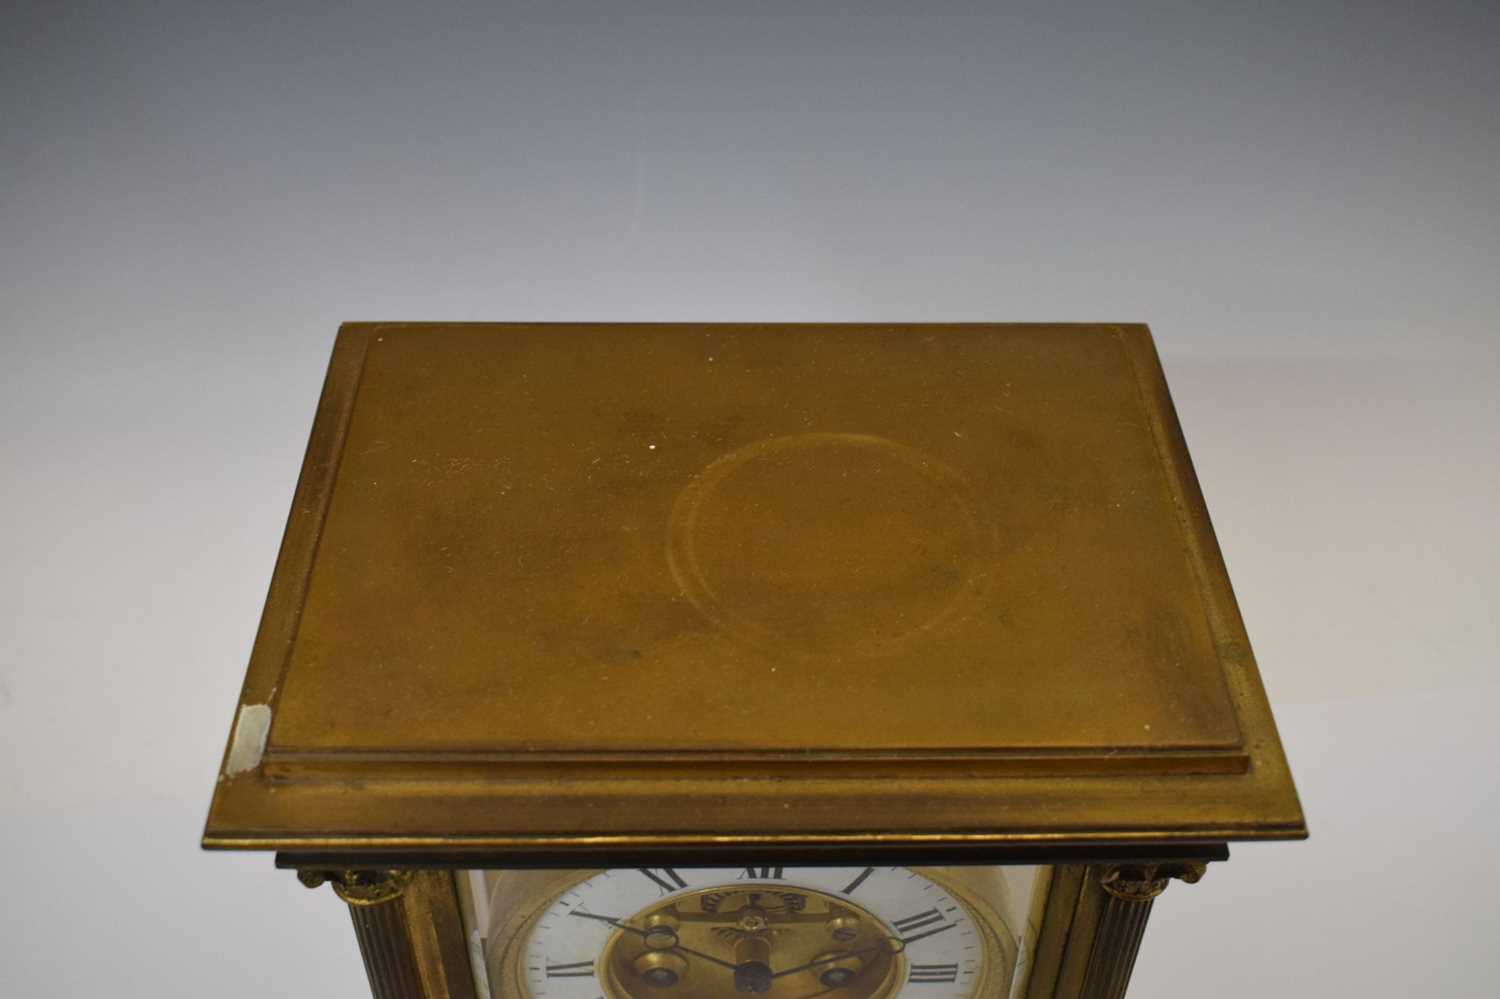 Late 19th century French brass four-glass mantel clock - Image 5 of 9